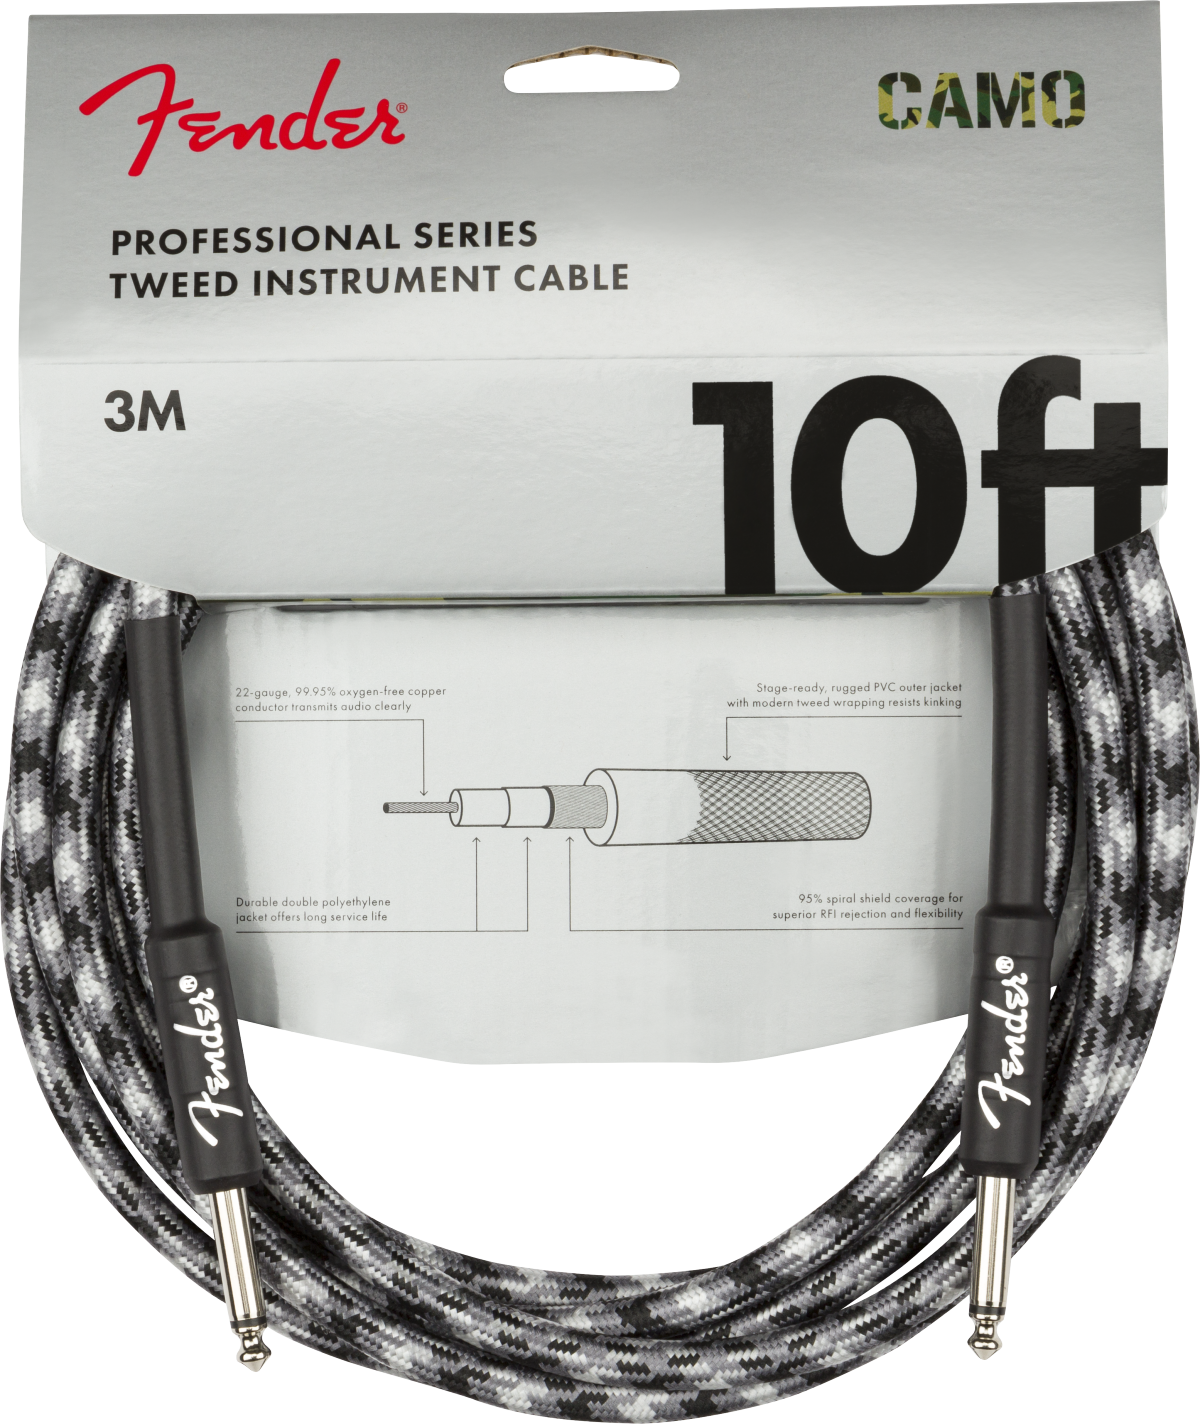 FENDER PROFESSIONAL SERIES INSTRUMENT CABLE 10FT - WINTER CAMO